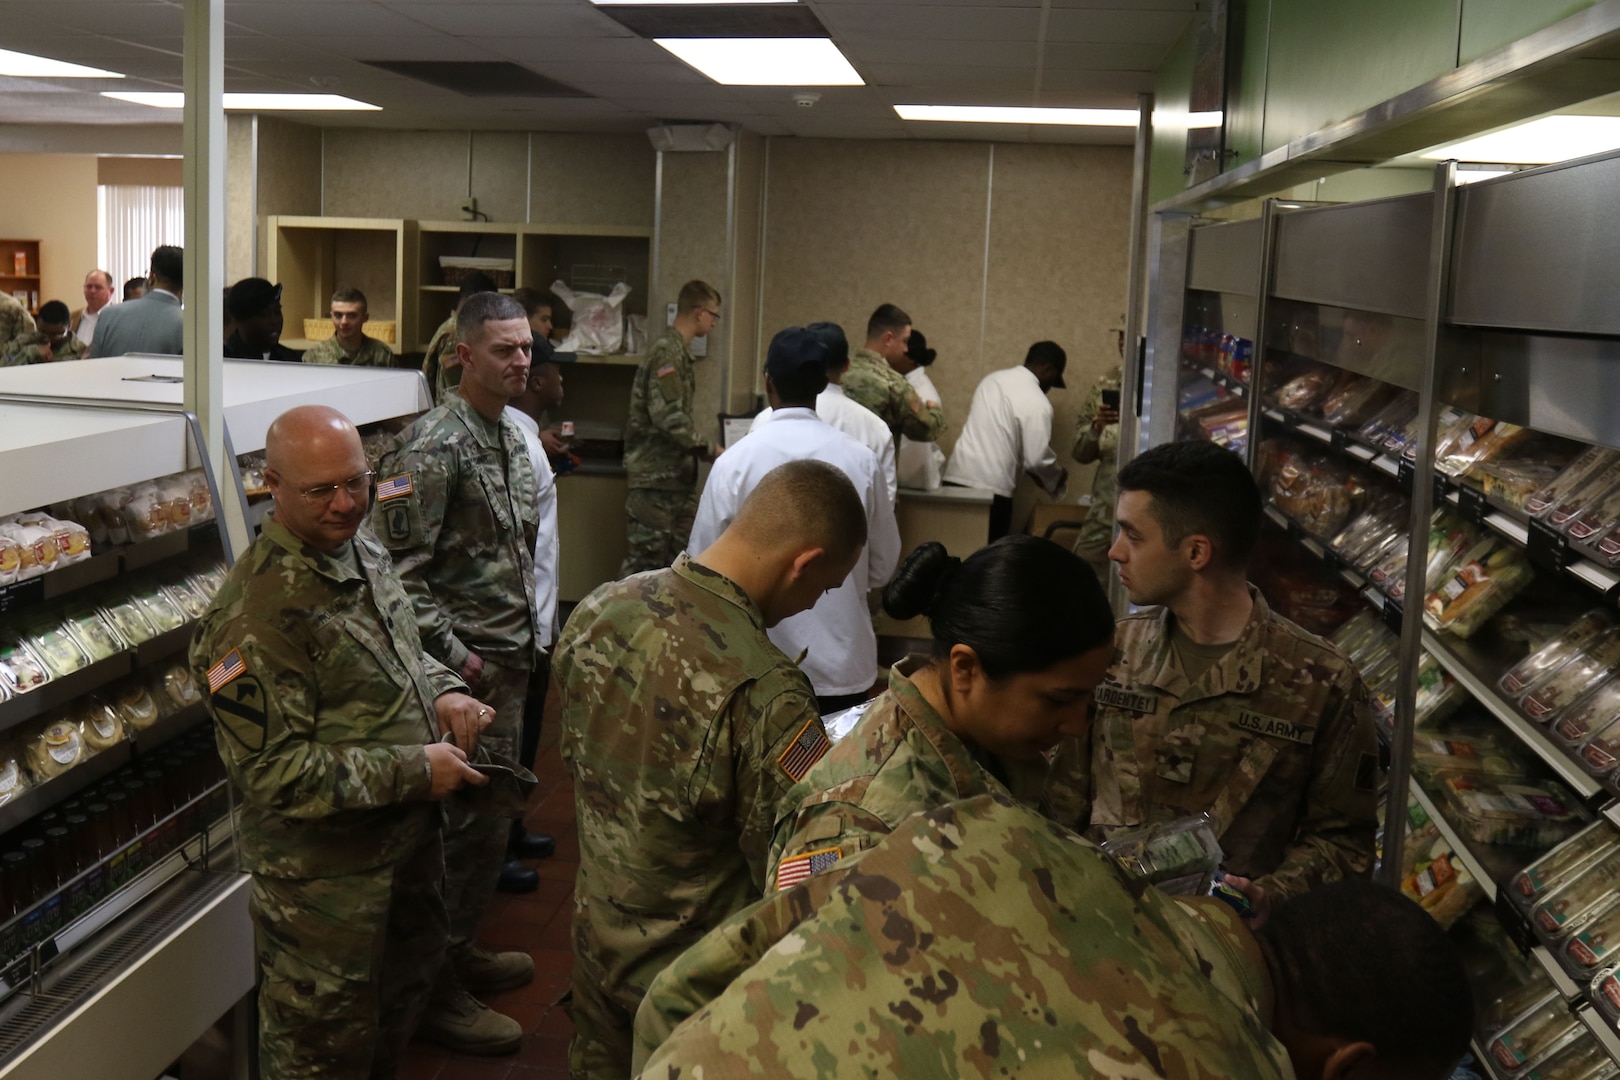 Soldiers with the 3rd Infantry Division shop at the Culinary Outpost Kiosk, Feb. 4, 2019 at Ft. Stewart, Ga. The food kiosk, first of its kind for the DLA and the Army, symbolizes the innovation and modernization efforts of the Army’s food program. (U.S. Army photo by Sgt. Elizabeth White/Released)